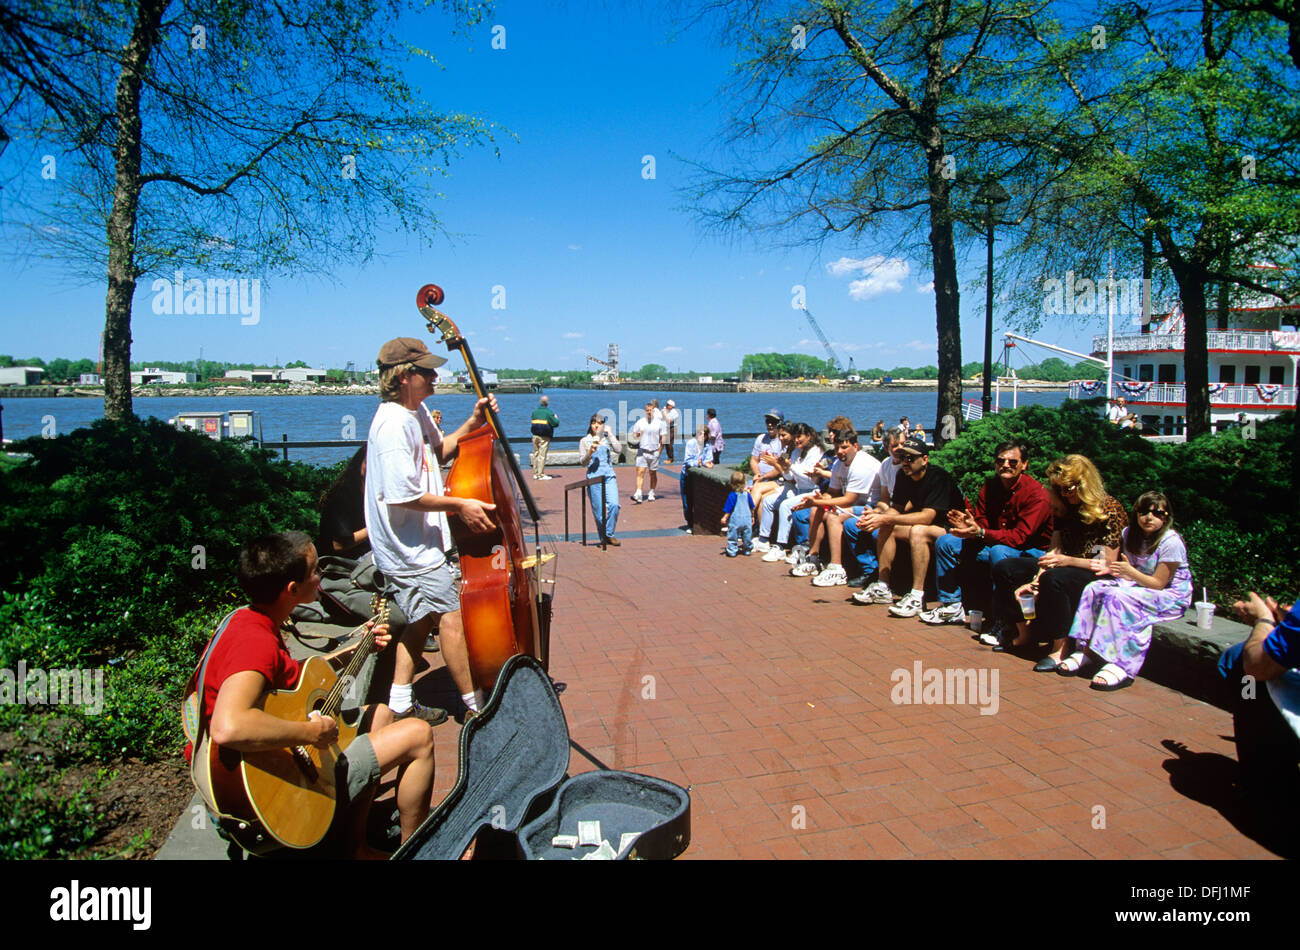 Street musicians performing on Savannah's River Street on the city's waterfront, Georgia, USA Stock Photo